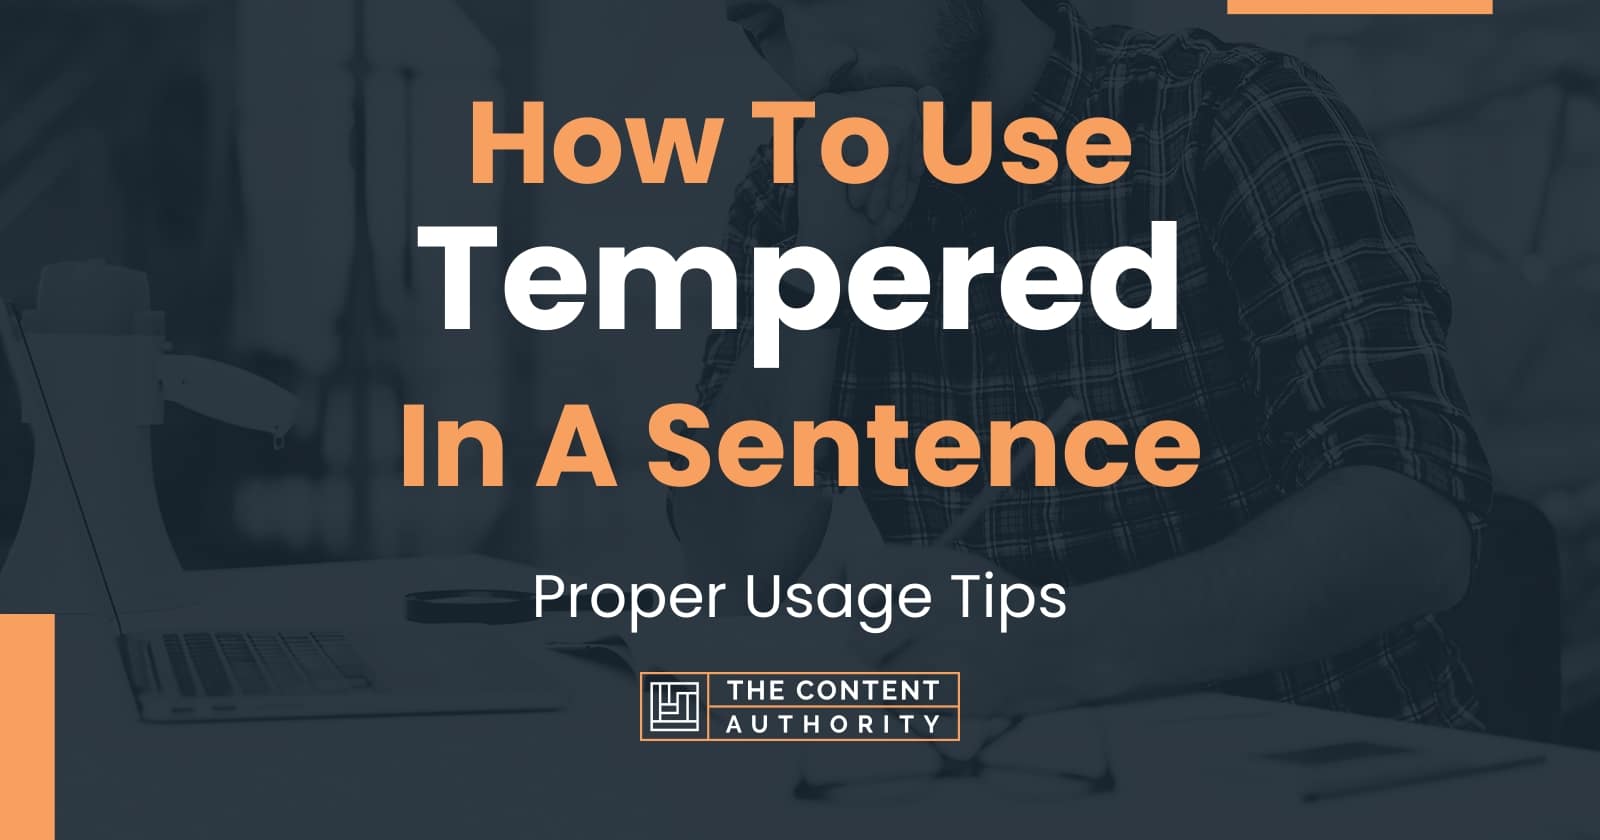 how-to-use-tempered-in-a-sentence-proper-usage-tips